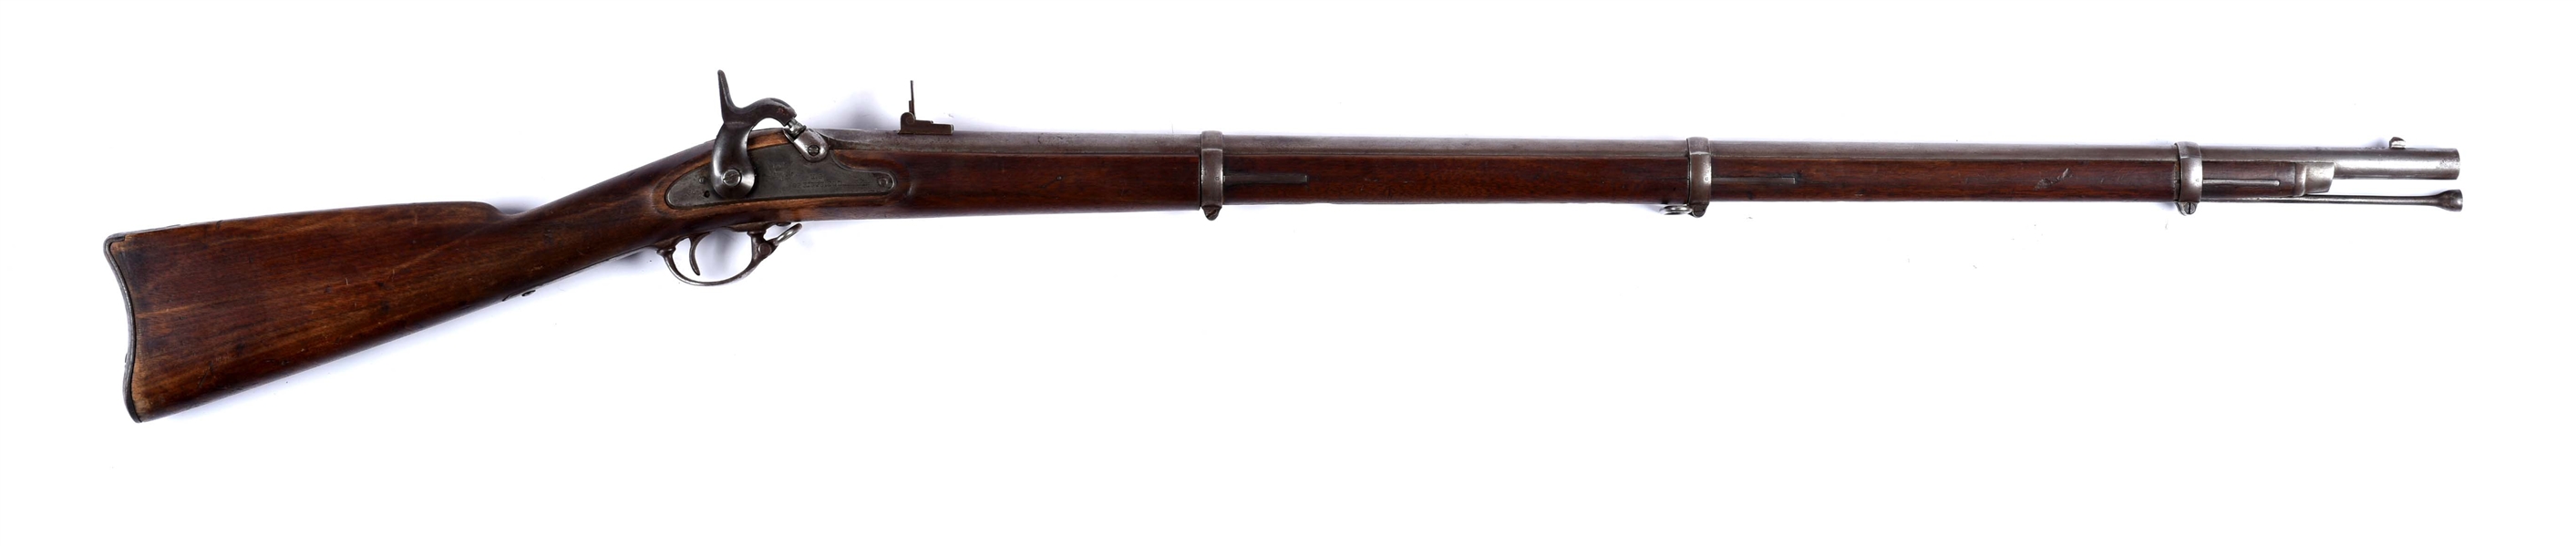 (A) U.S. MODEL 1863 SPRINGFIELD PERCUSSION RIFLED MUSKET.